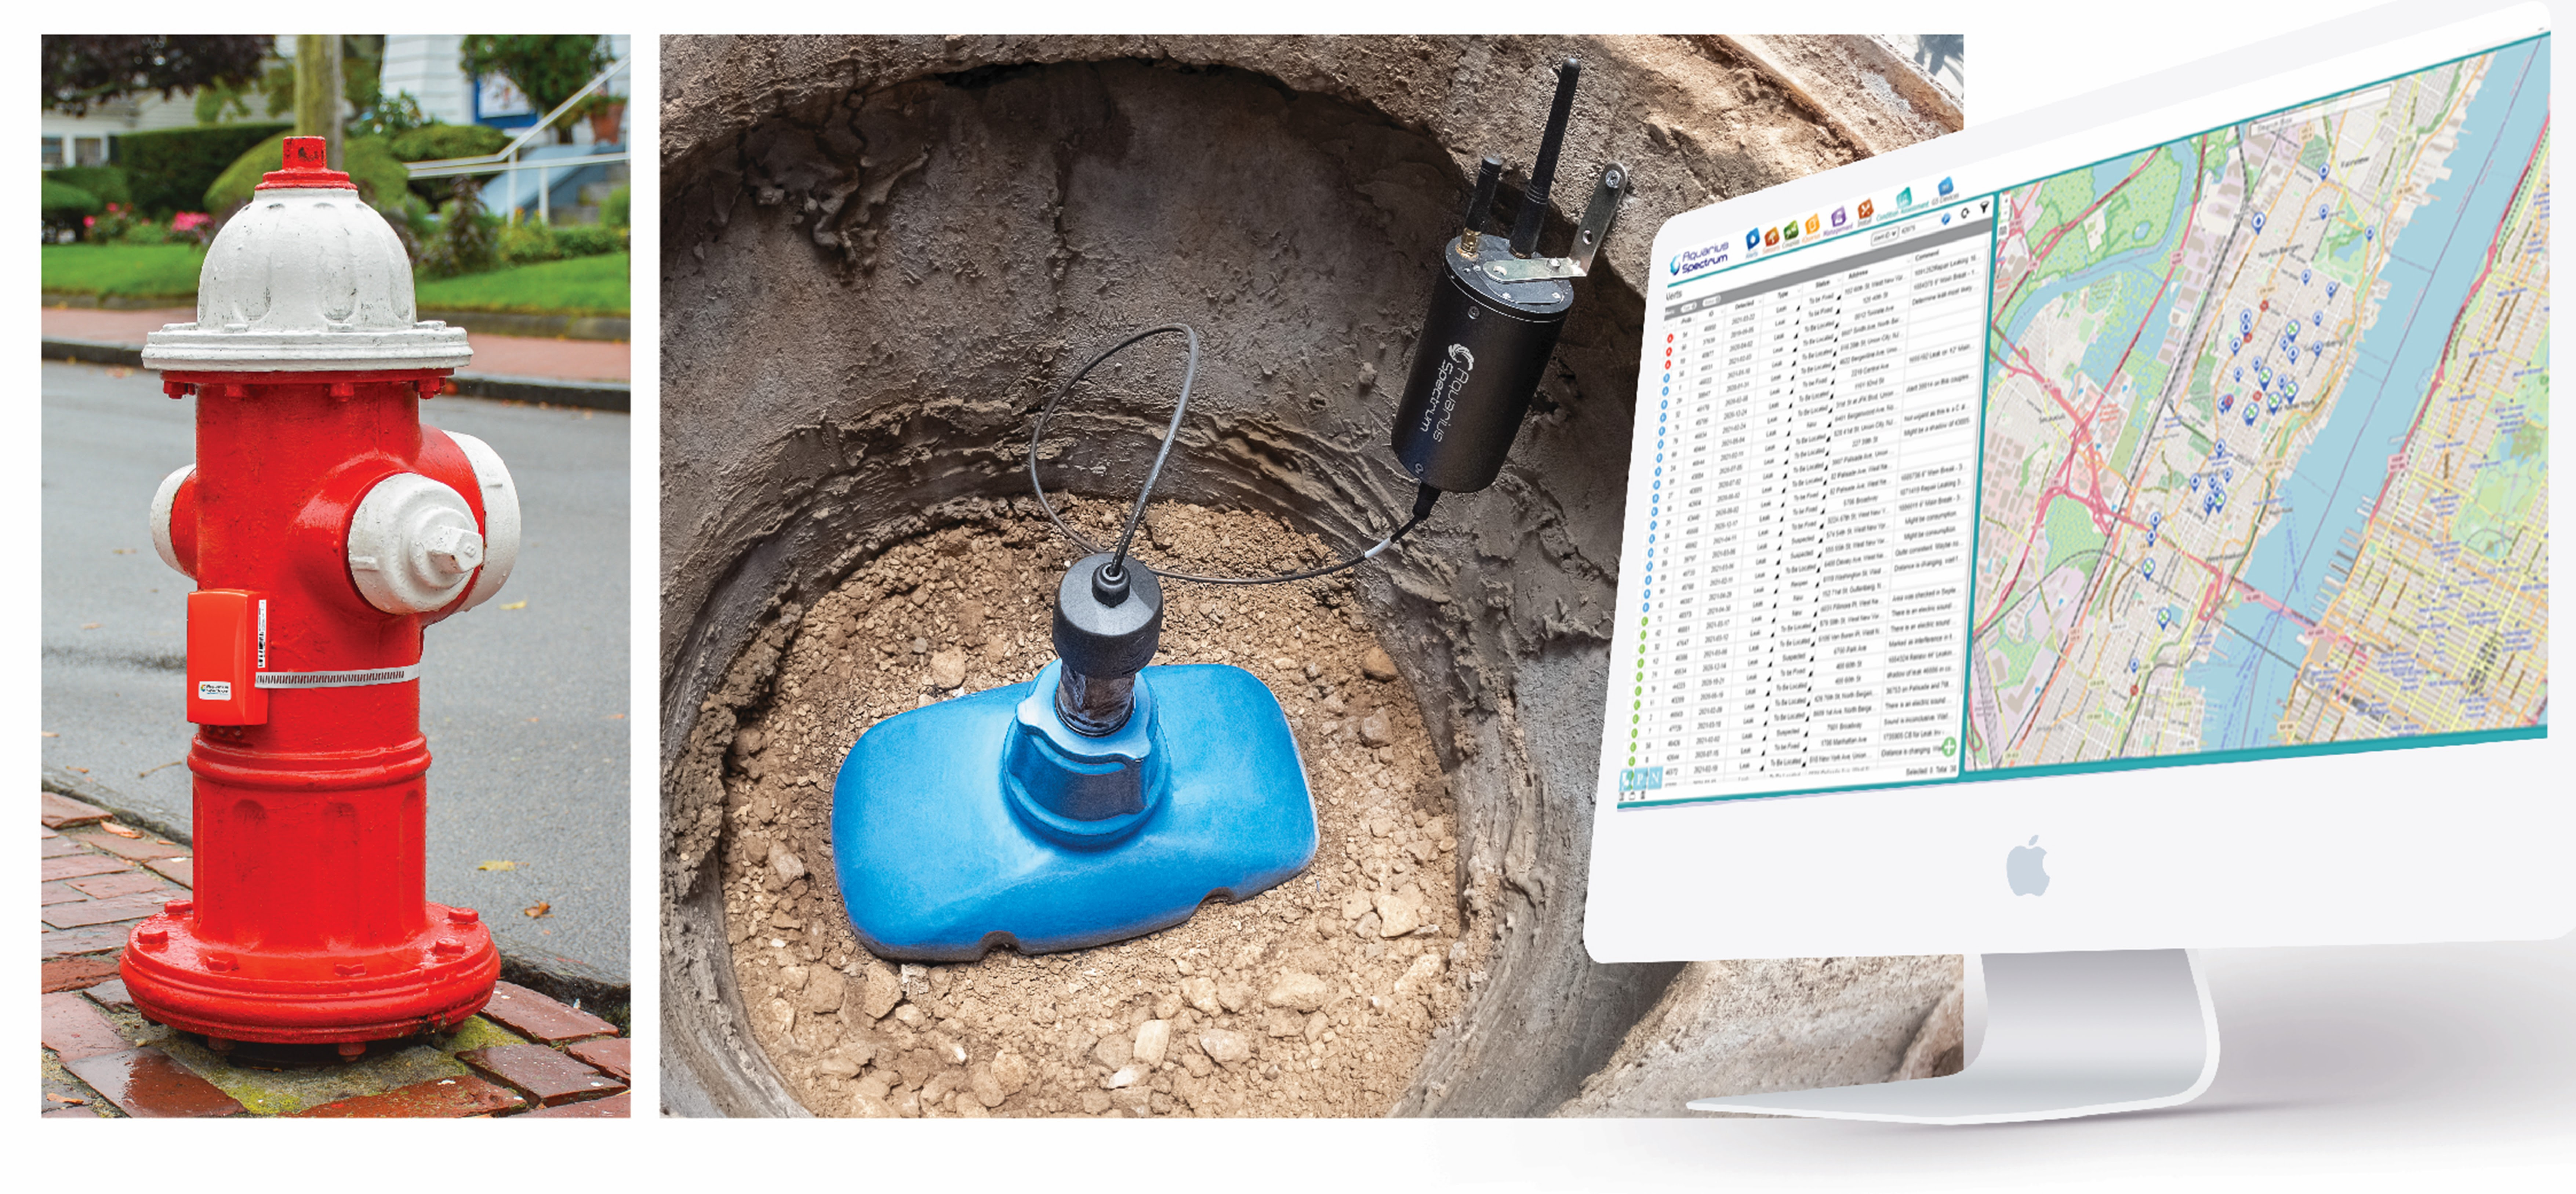 Water leak detection by AQSense-Edge: Aquarius Spectrum's acoustic Cat-M/NB-IoT correlating sensors; Installations can be both aboveground and underground; Leak alerts are classified and presented on a unique dashboard